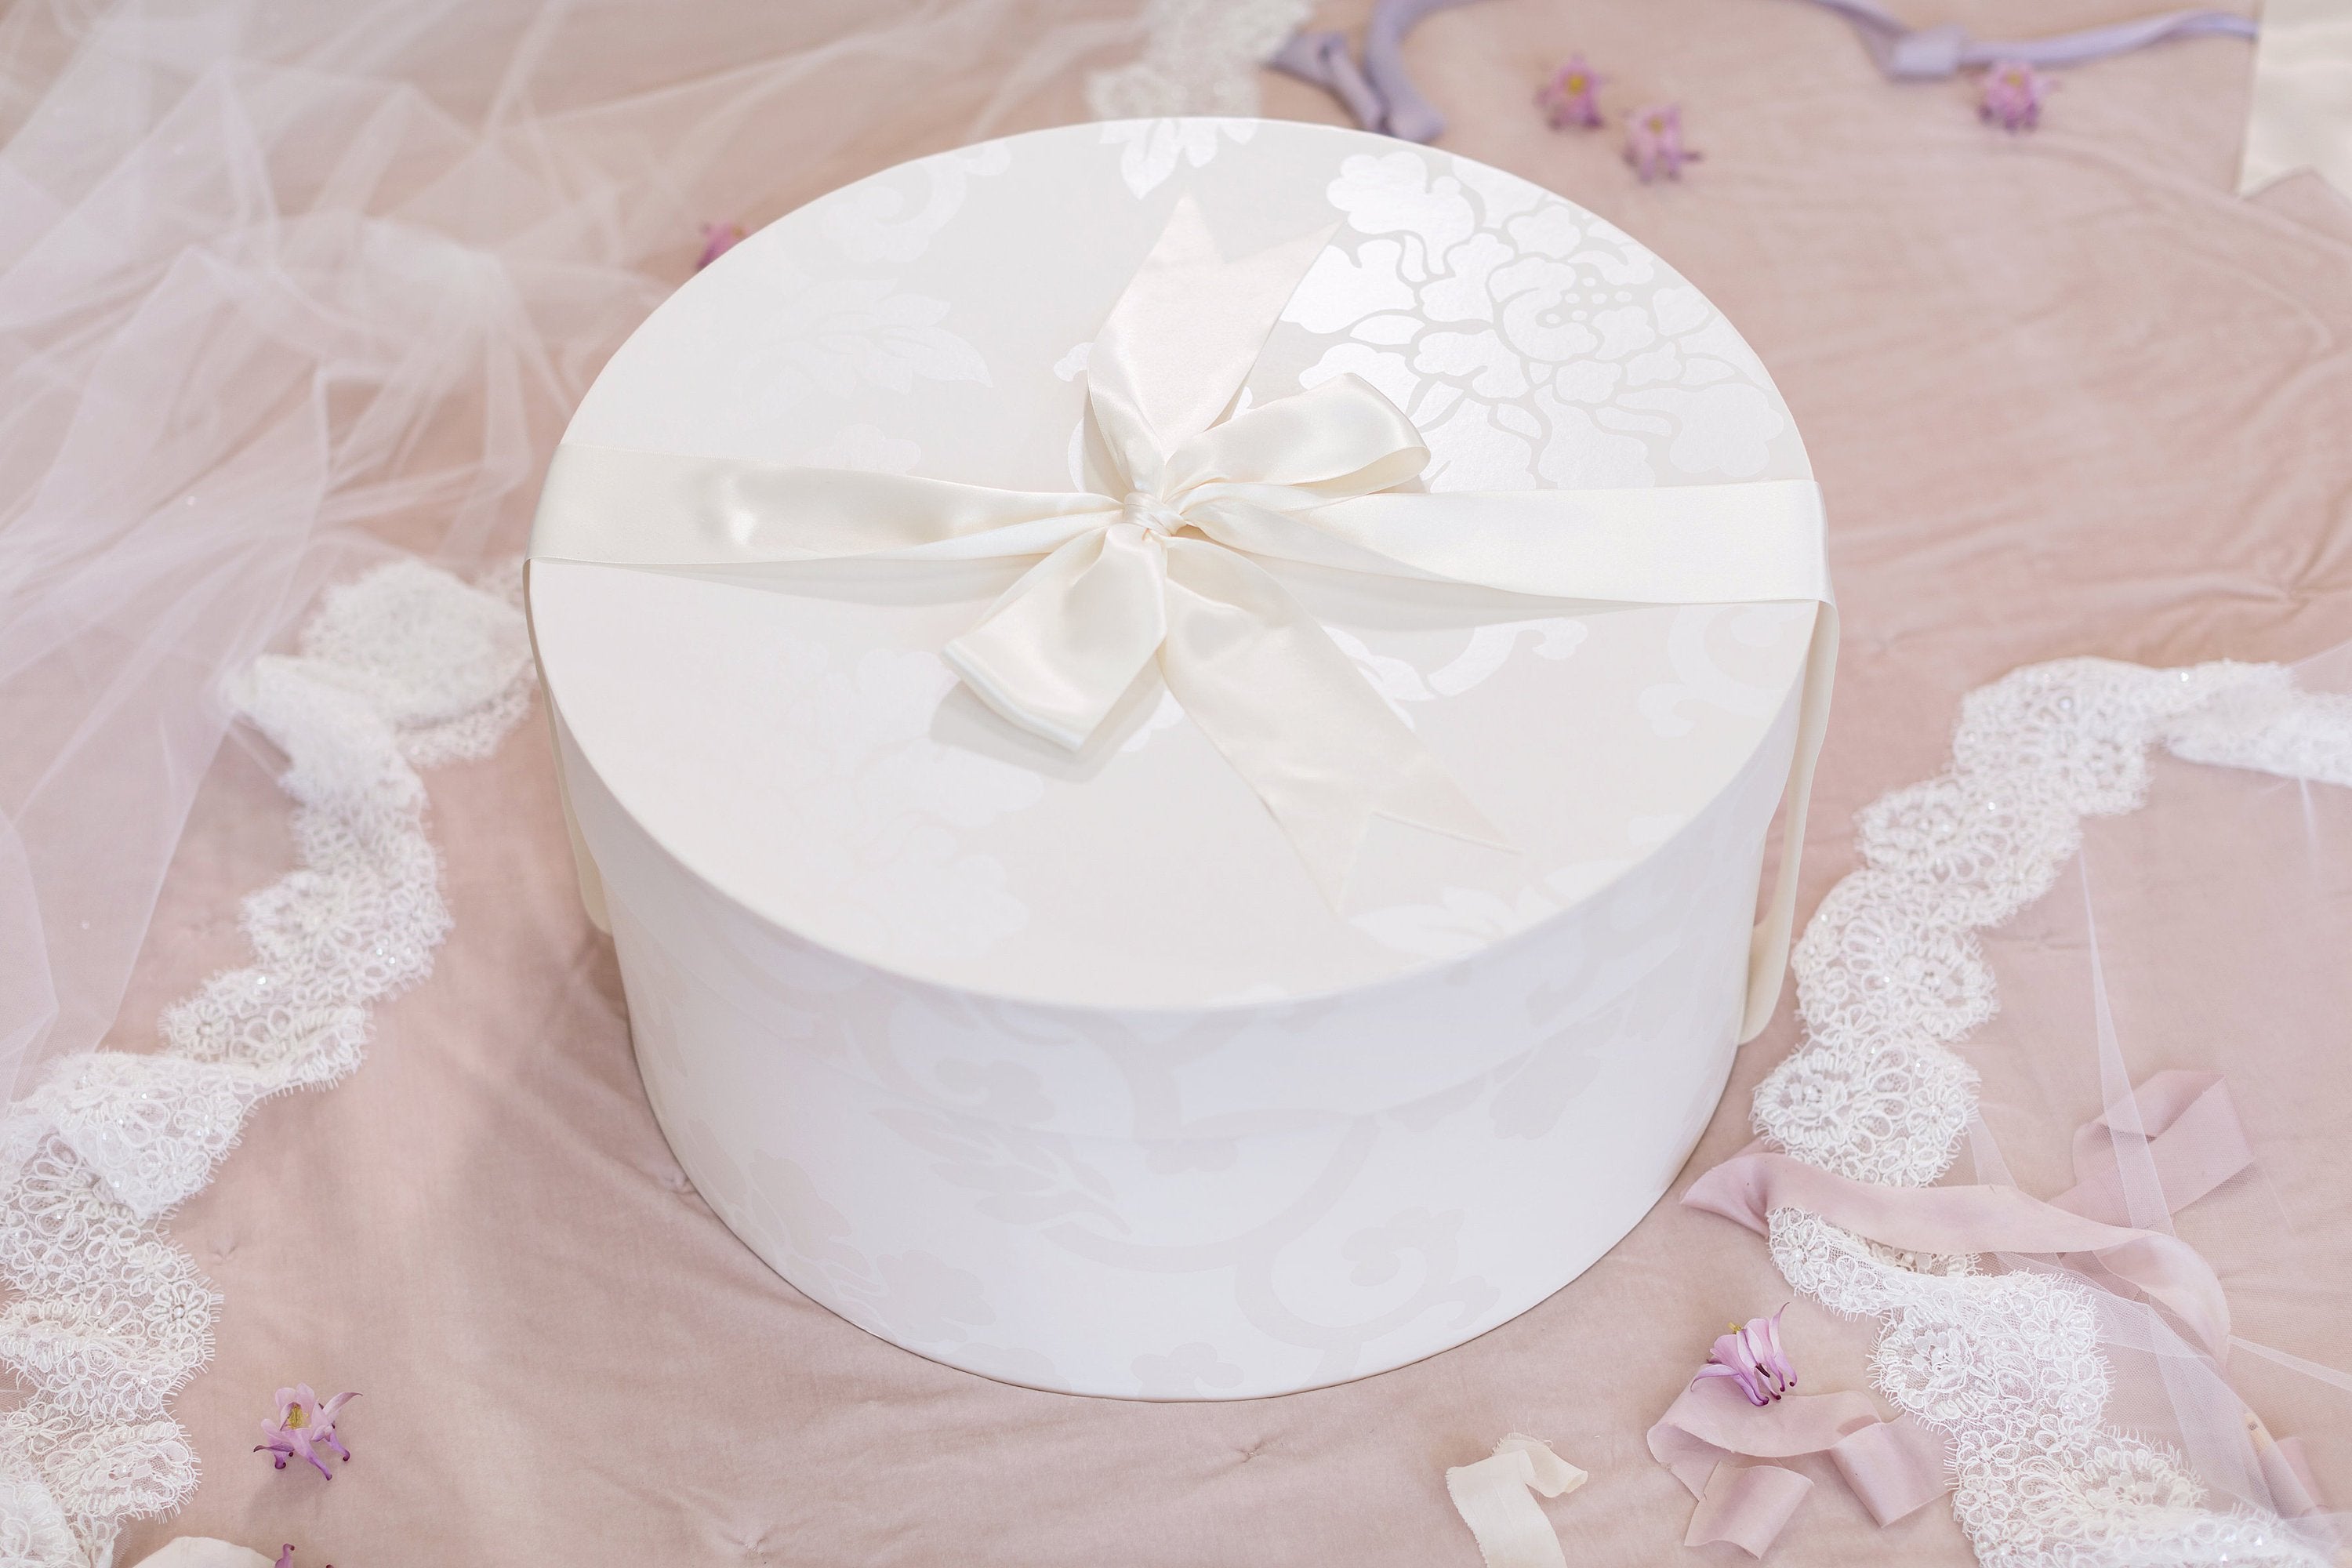 Wedding Fascinator/Hat Box - The Dress Cleaning Company